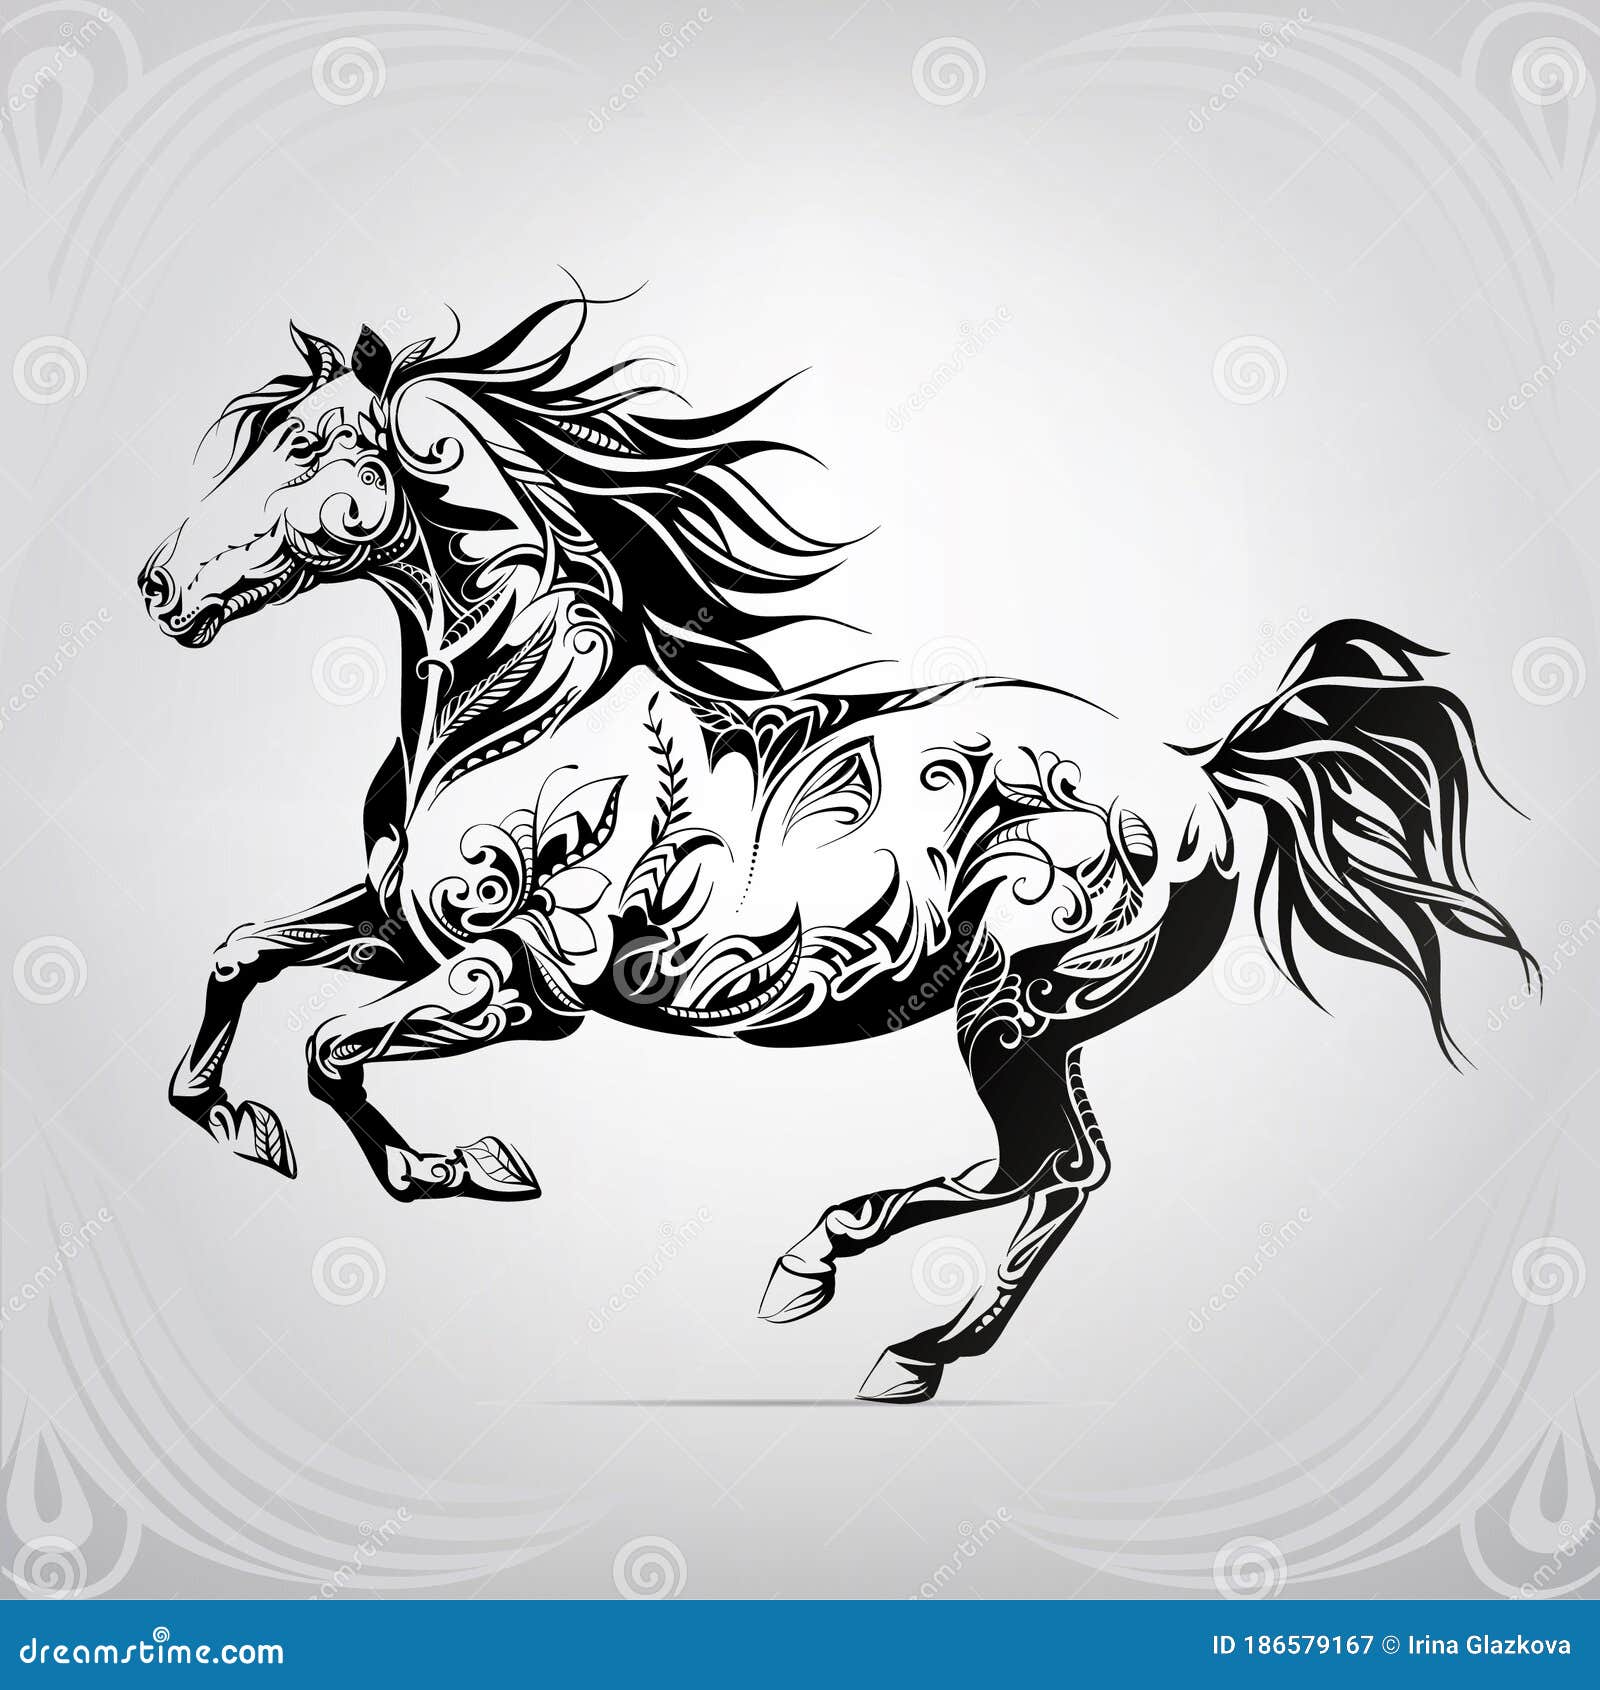 Discover 170+ running horse tattoo latest